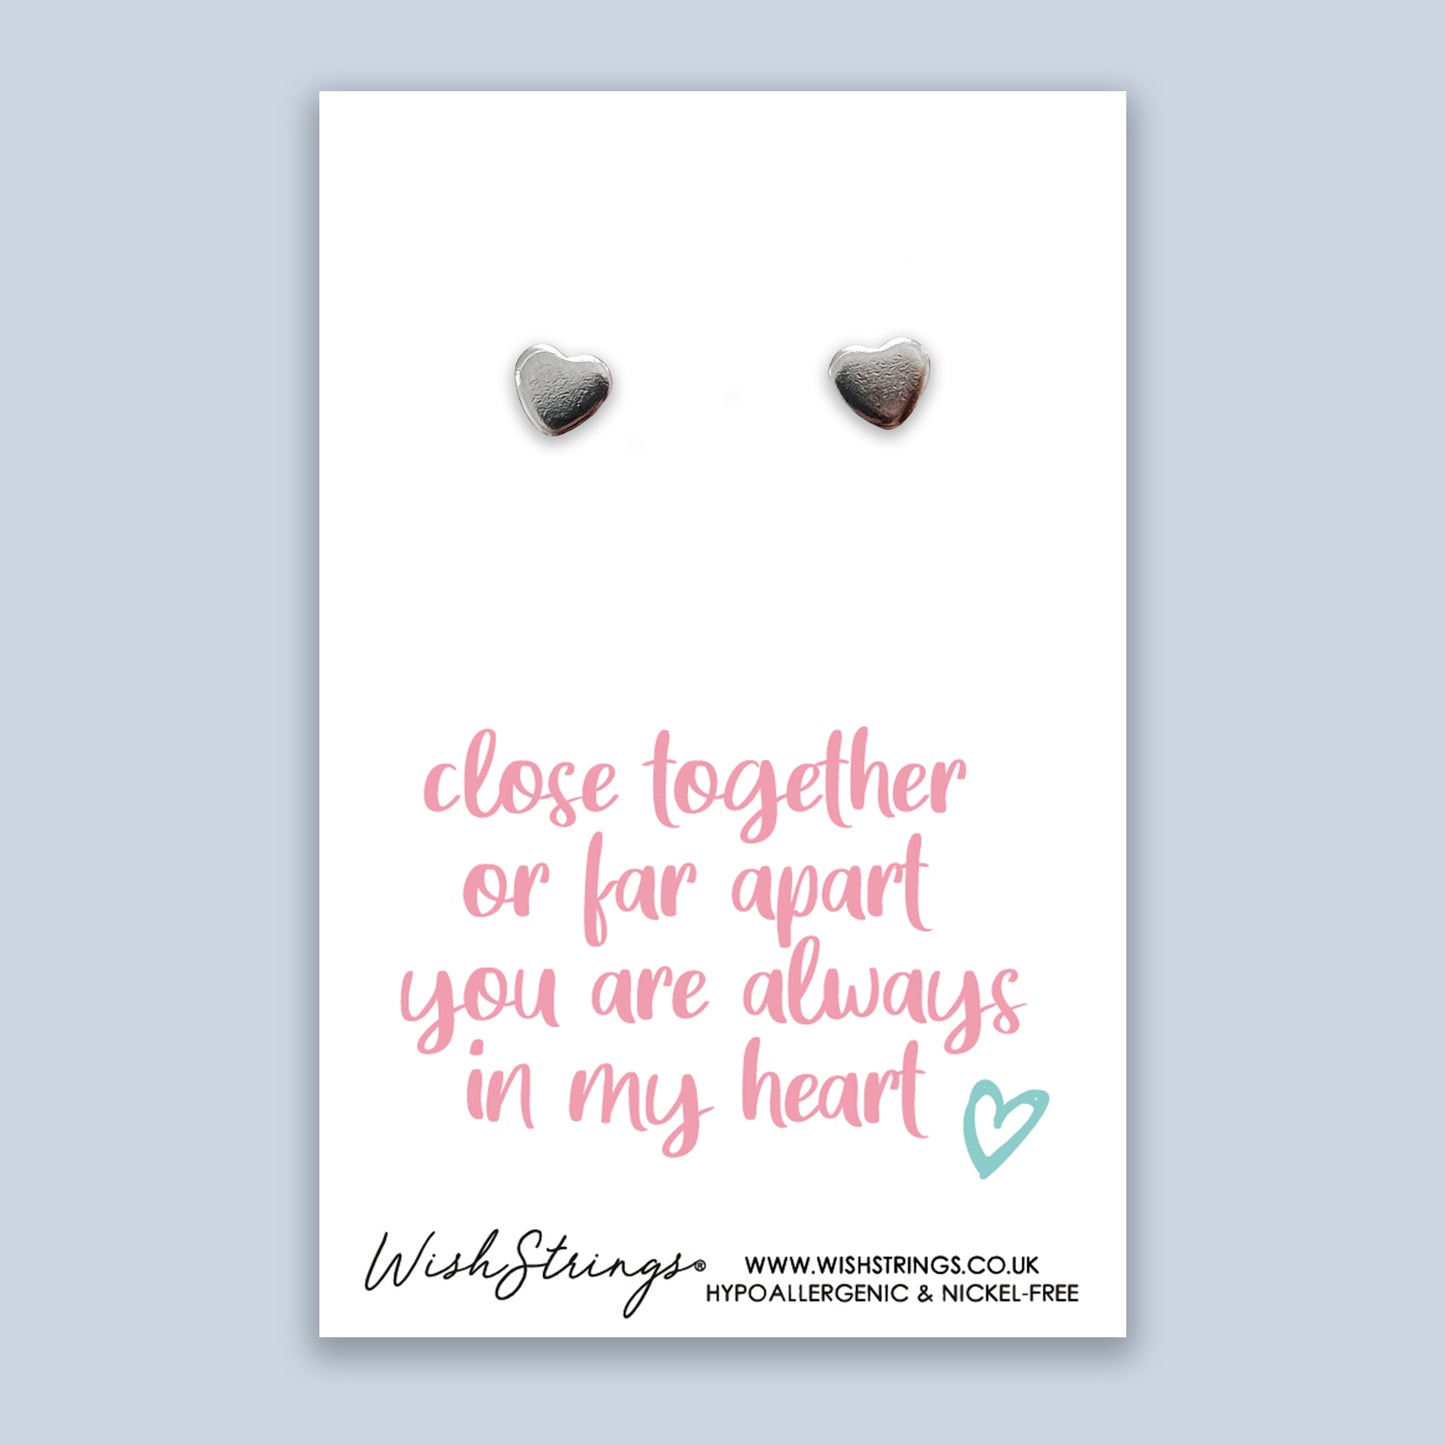 Close Together or far Apart you are Always in my Heart - Silver Heart Stud Earrings | 304 Stainless - Hypoallergenic